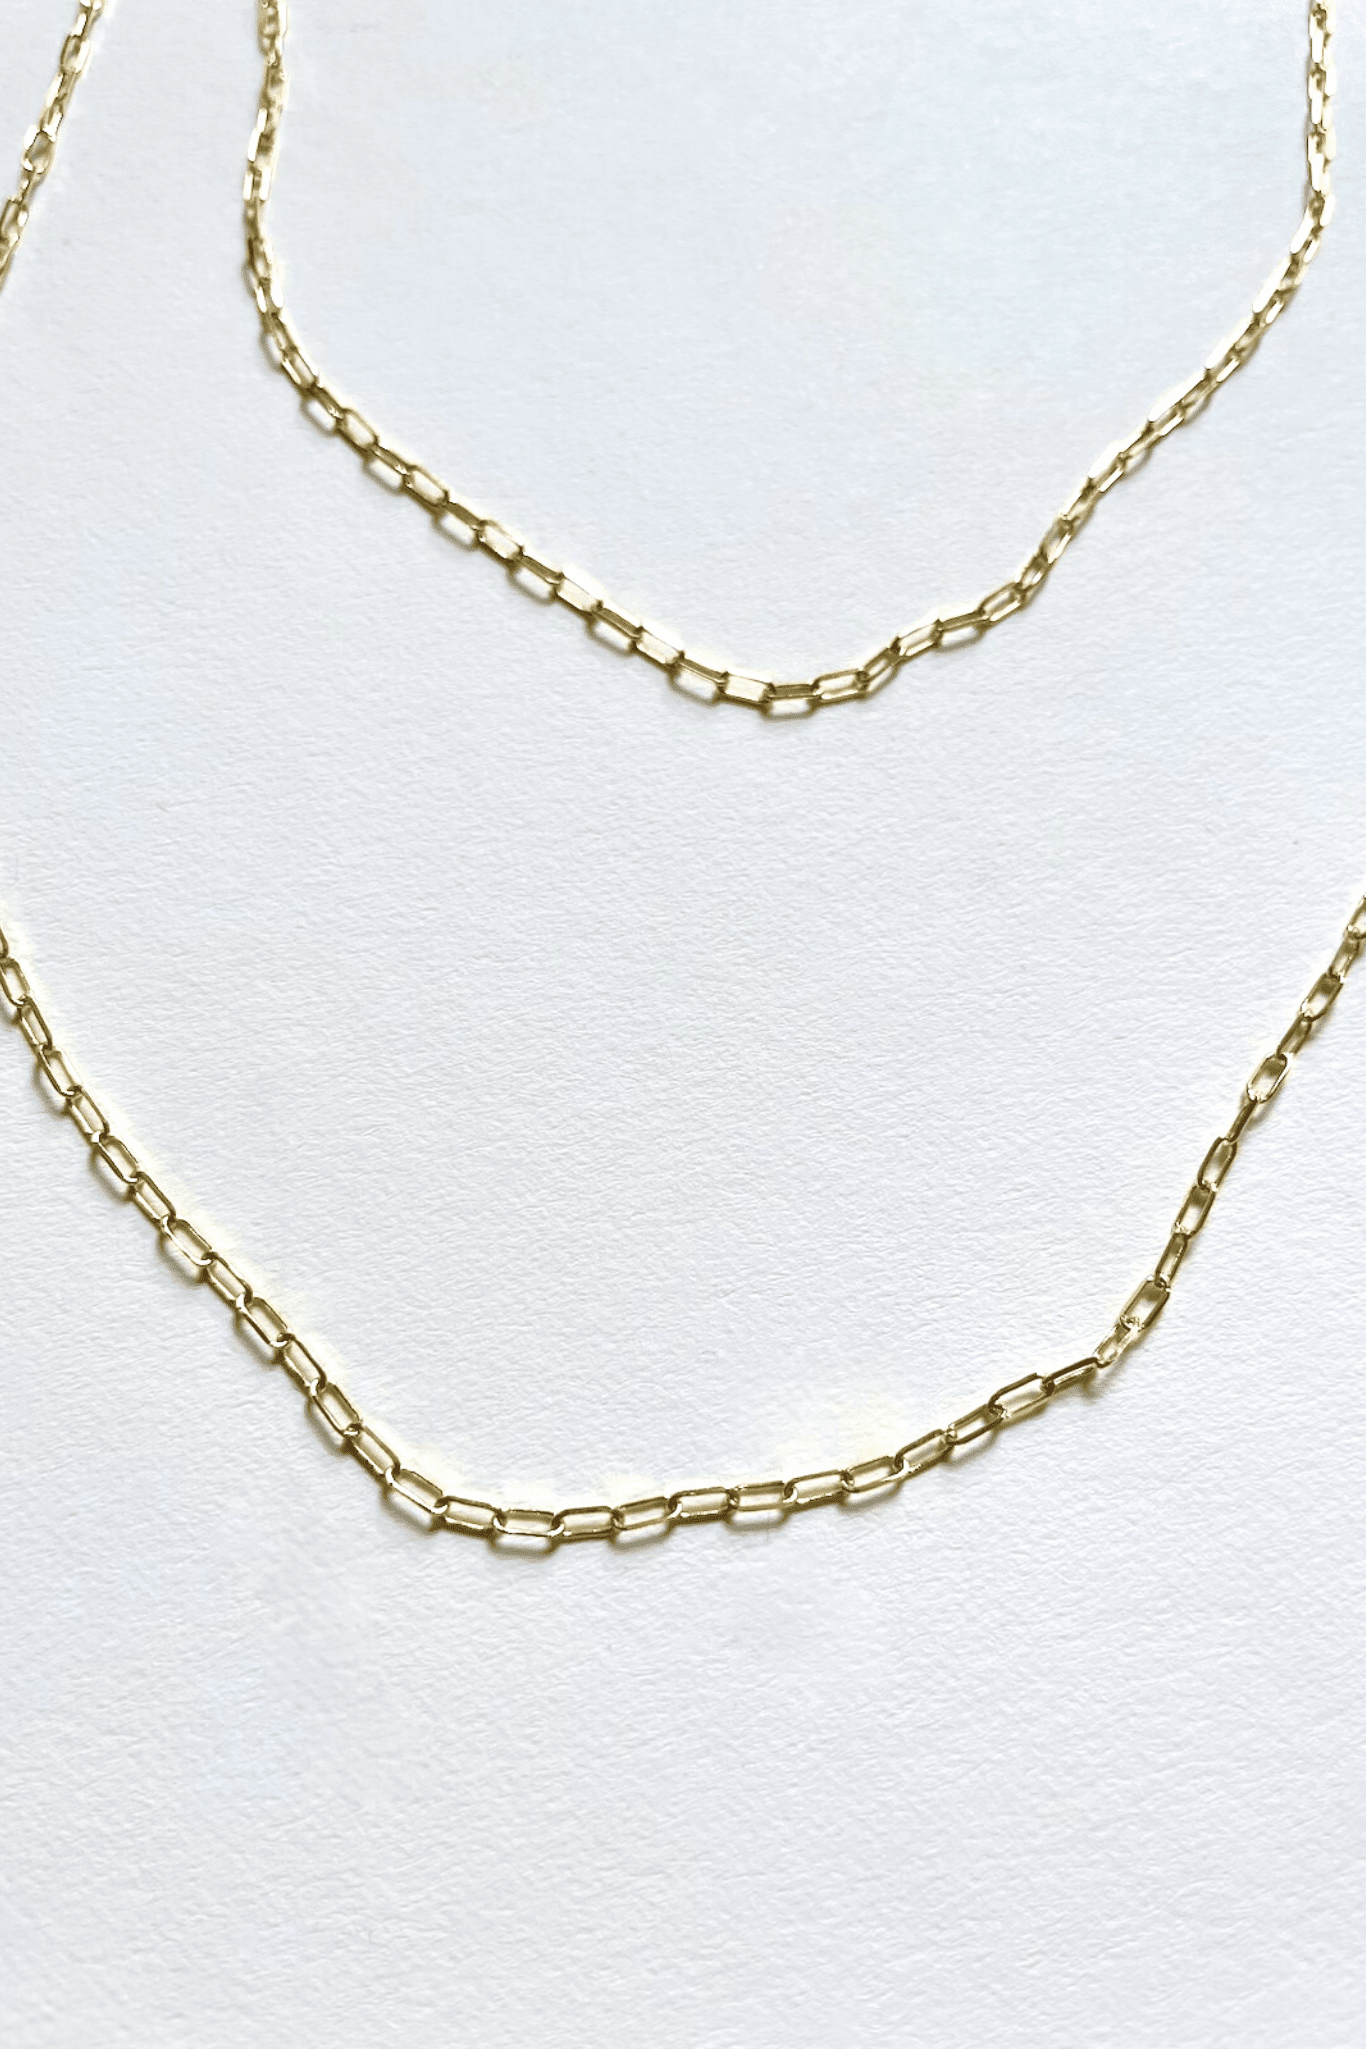 Carrie Hoffman - 14K 18” Paperclip Chain